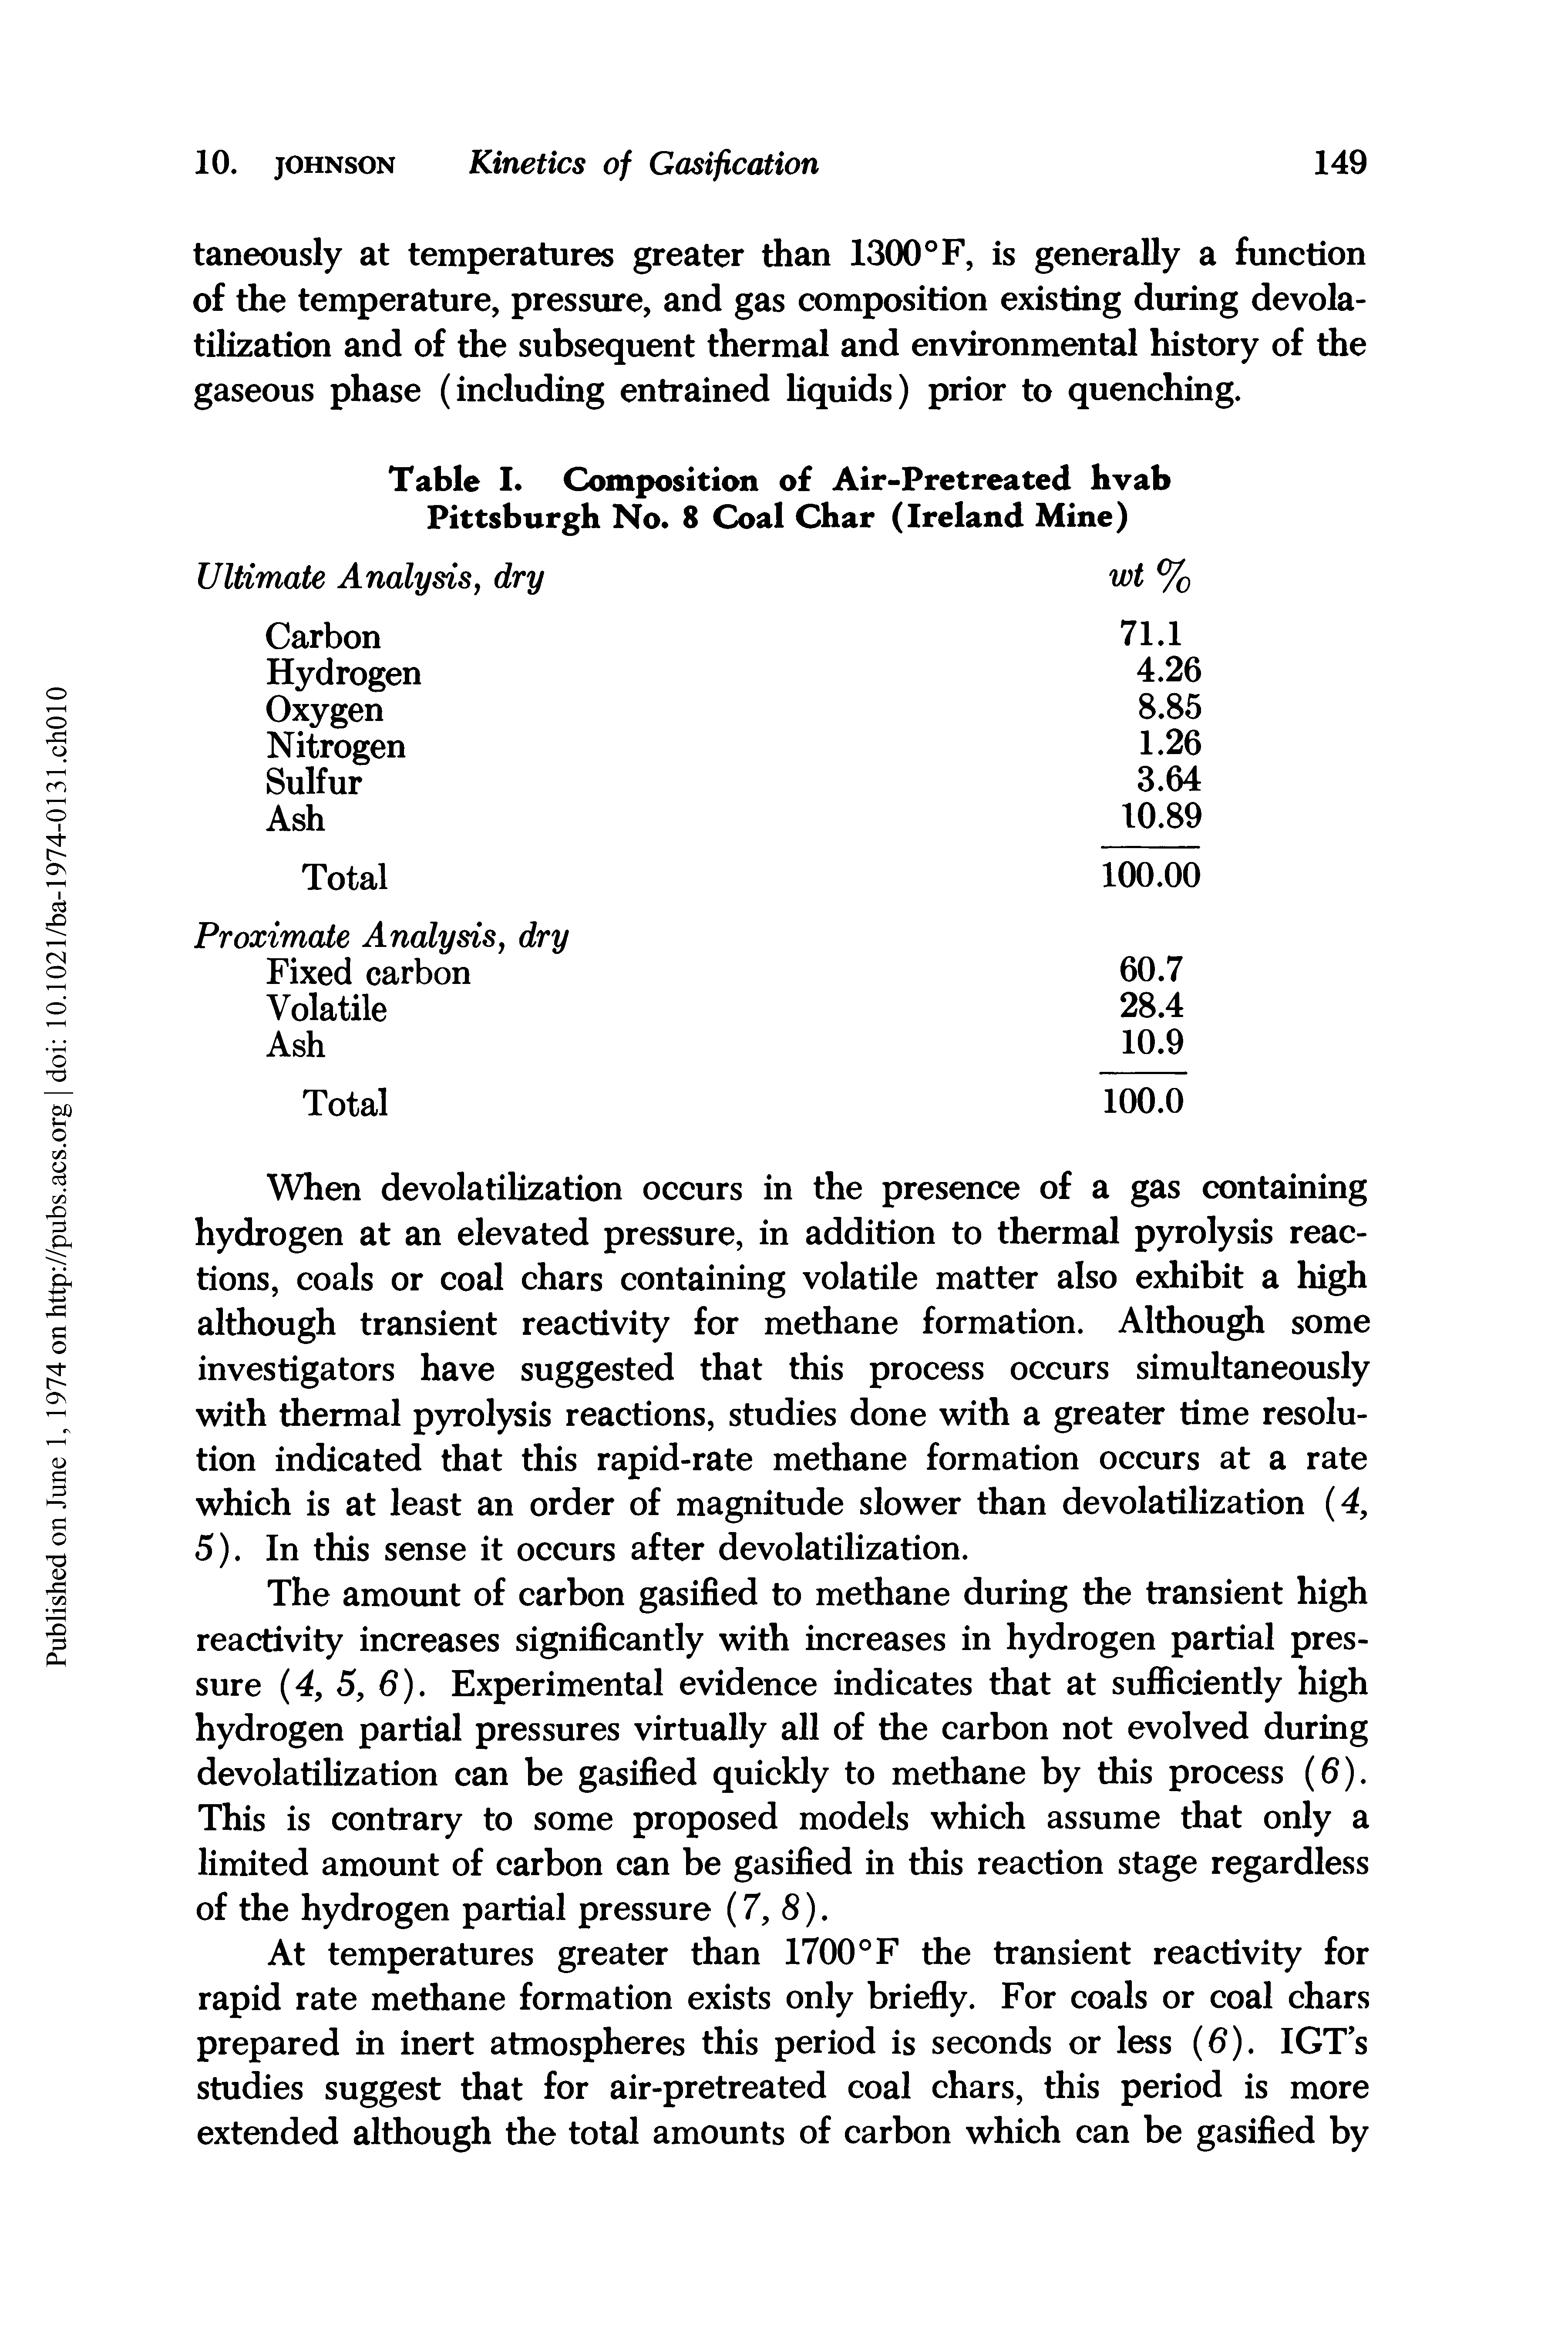 Table I. Composition of Air-Pretreated hvab Pittsburgh No. 8 Coal Char (Ireland Mine)...